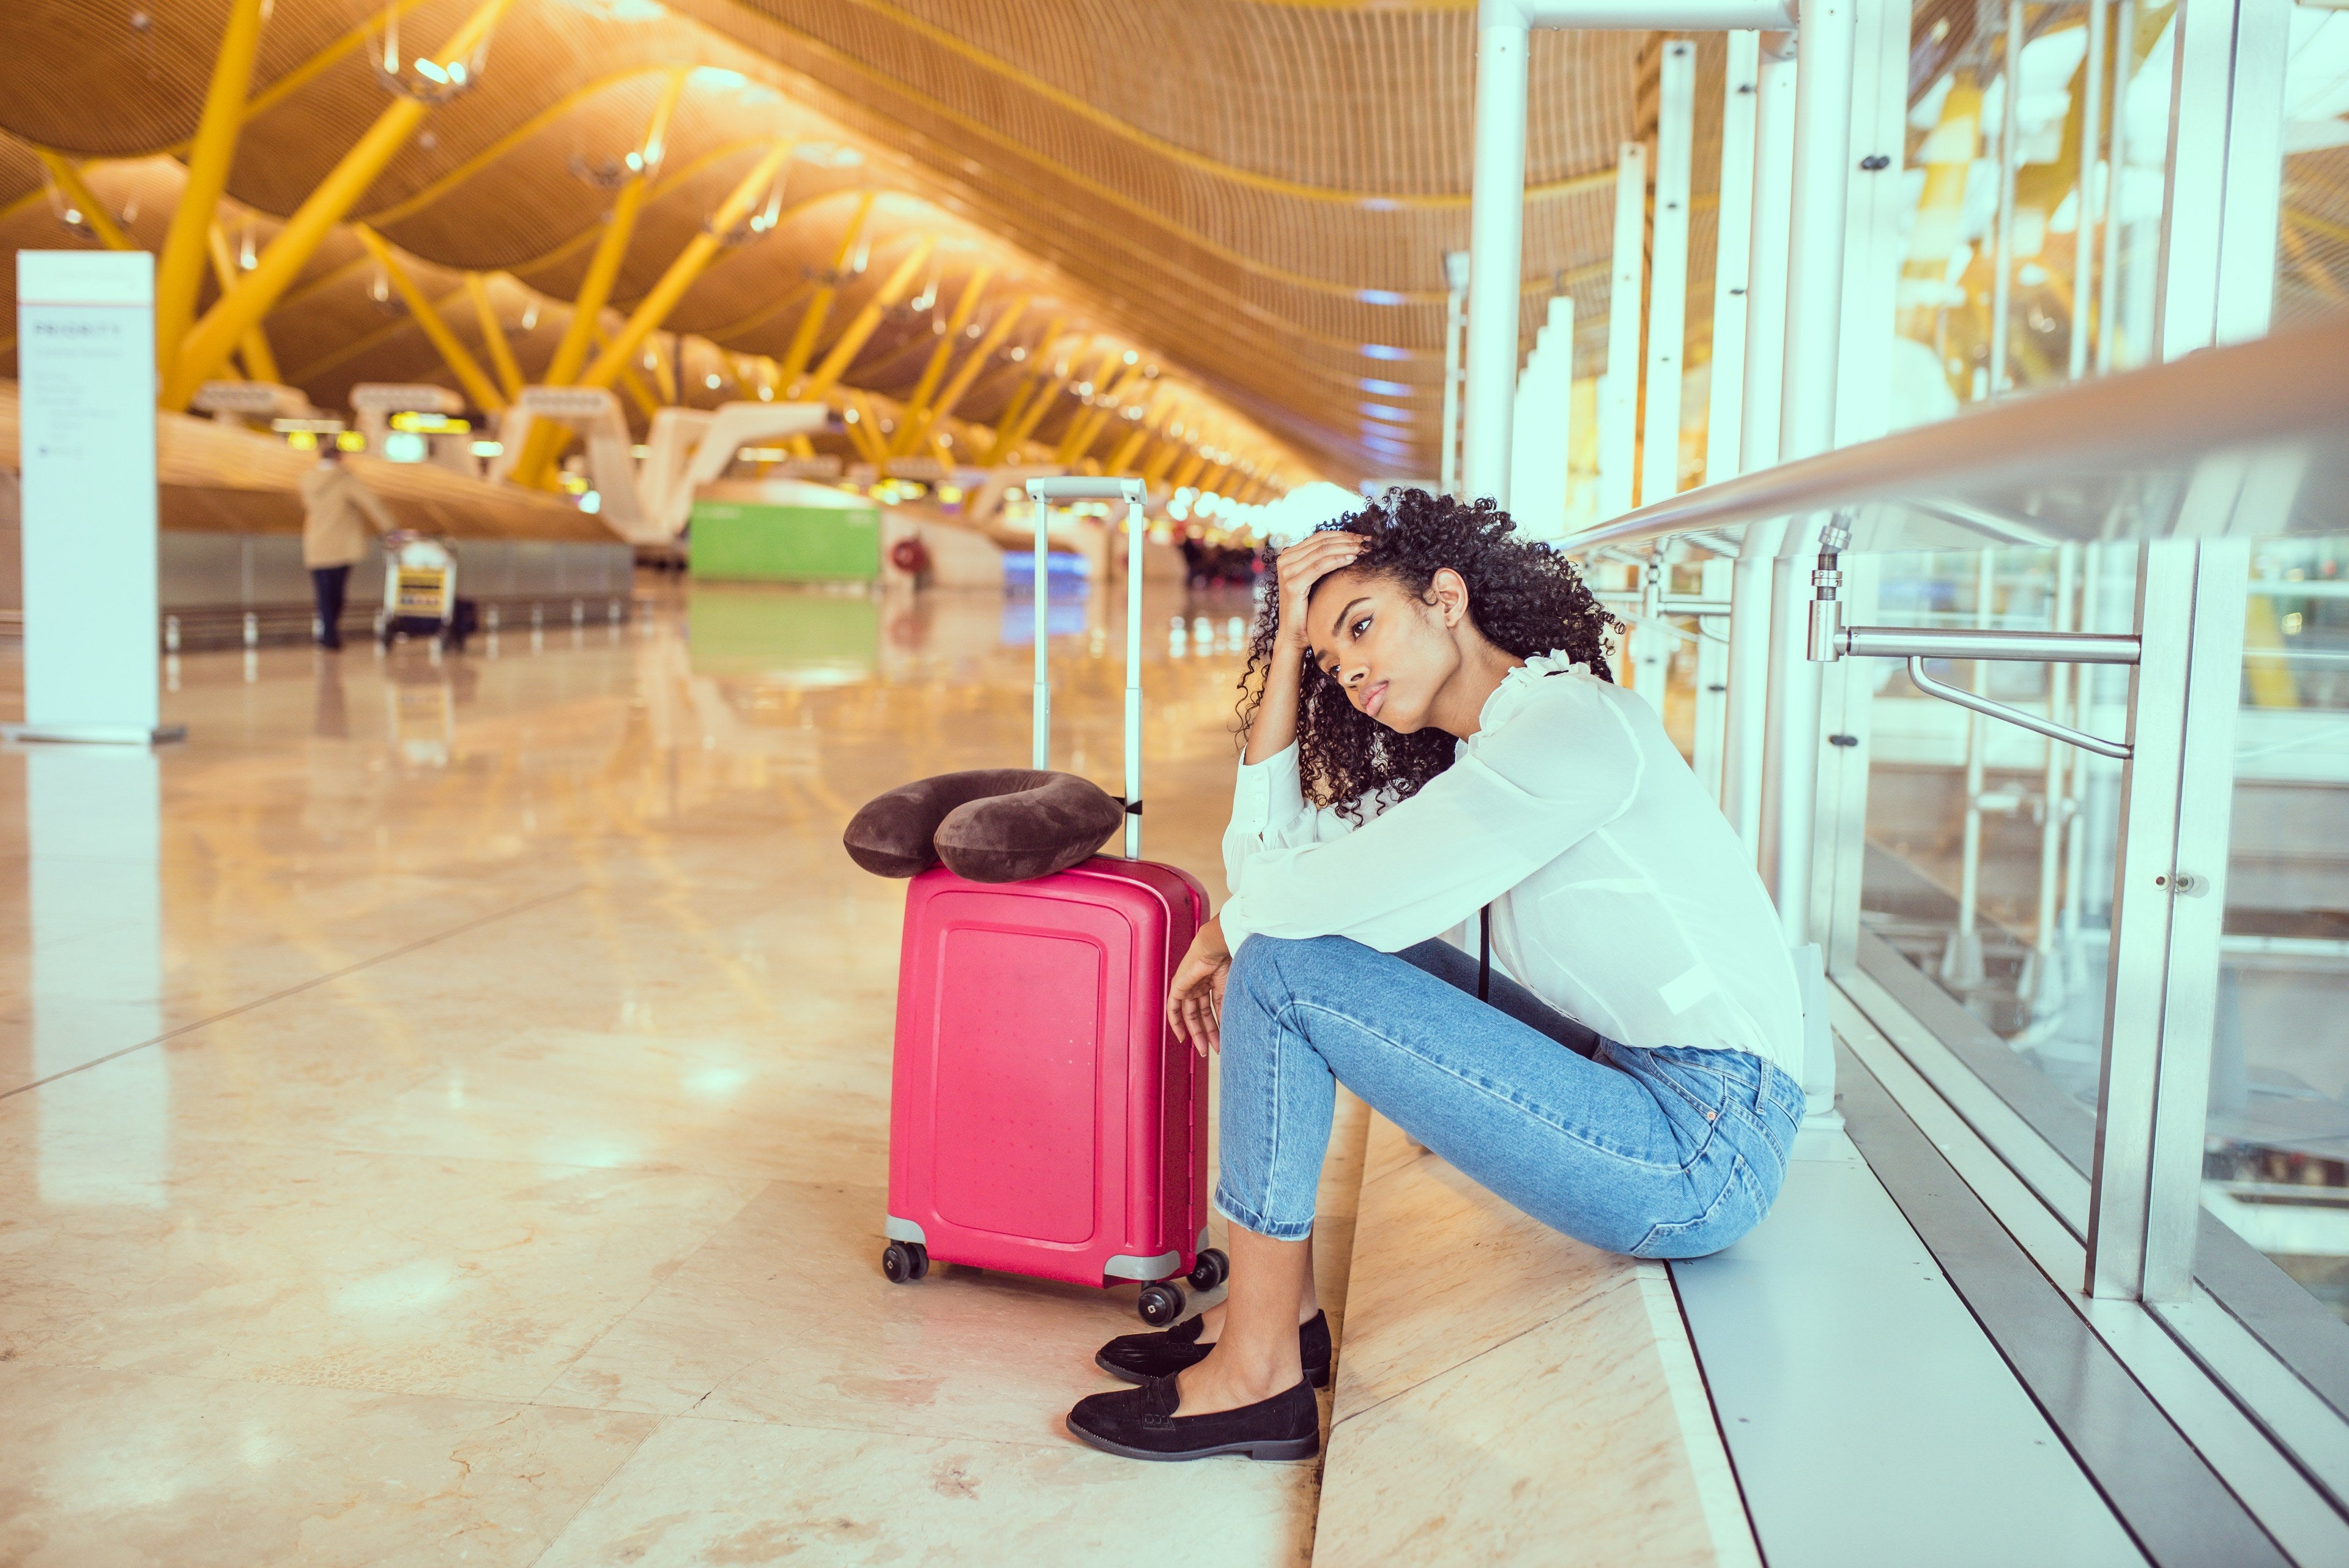 WOW Airlines' Bankruptcy Left Passengers Stranded! Here's How To Avoid Getting Stuck At The Airport When You Travel